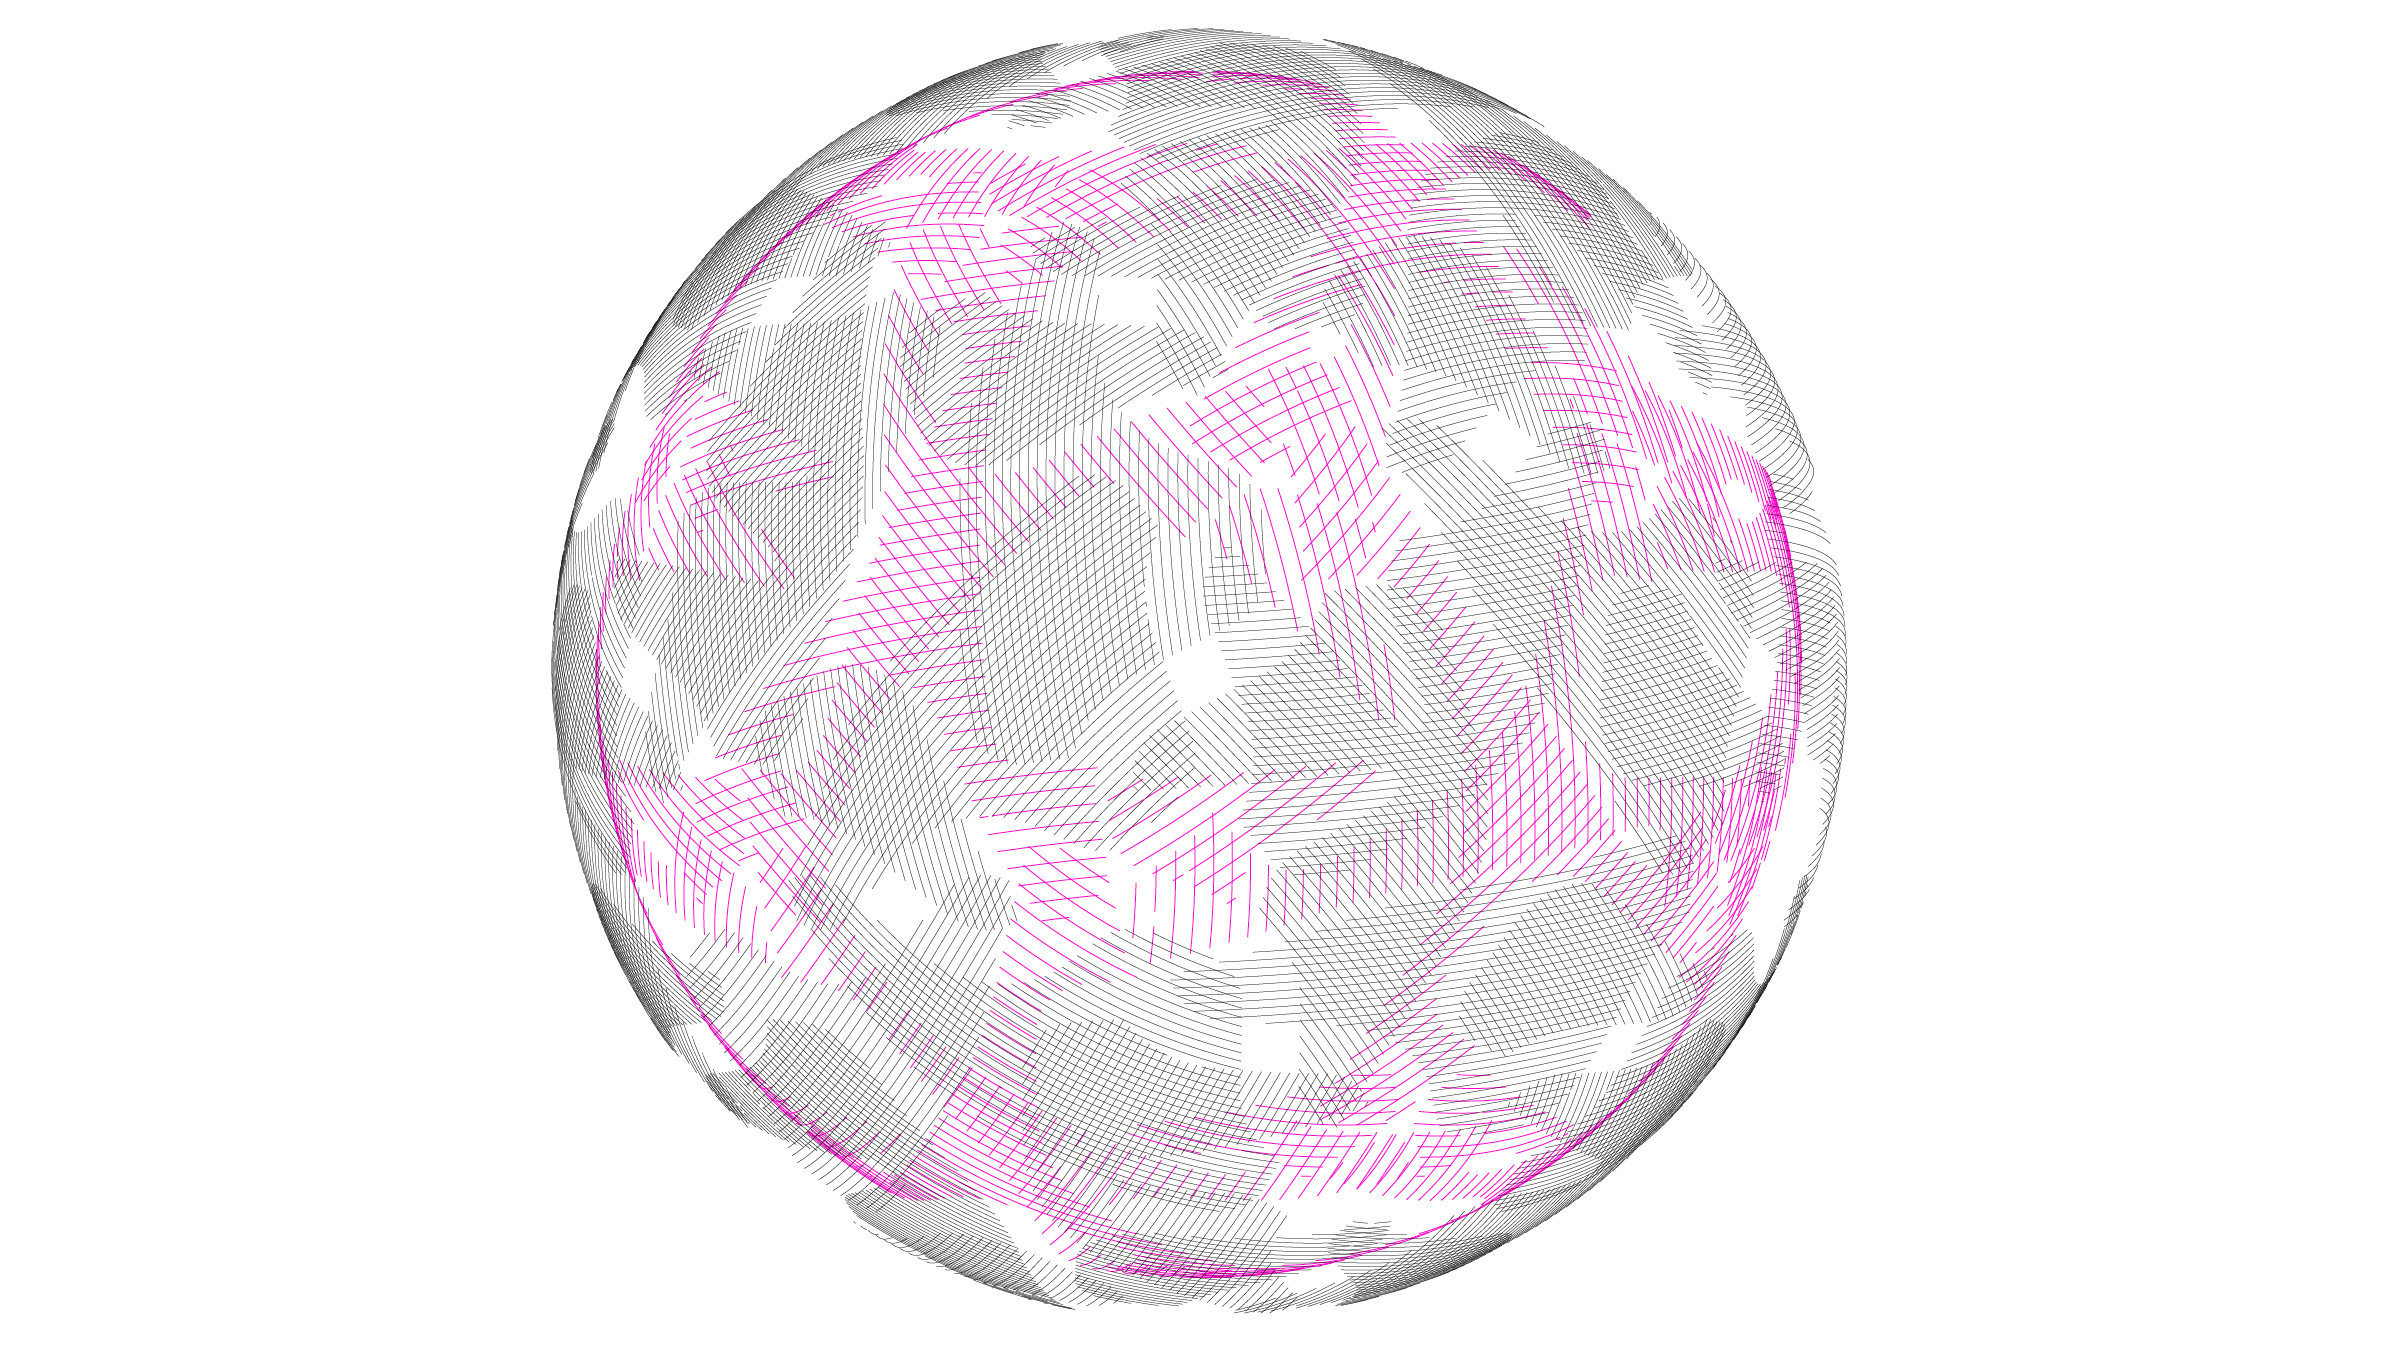 sphere with nested figures images.jpg